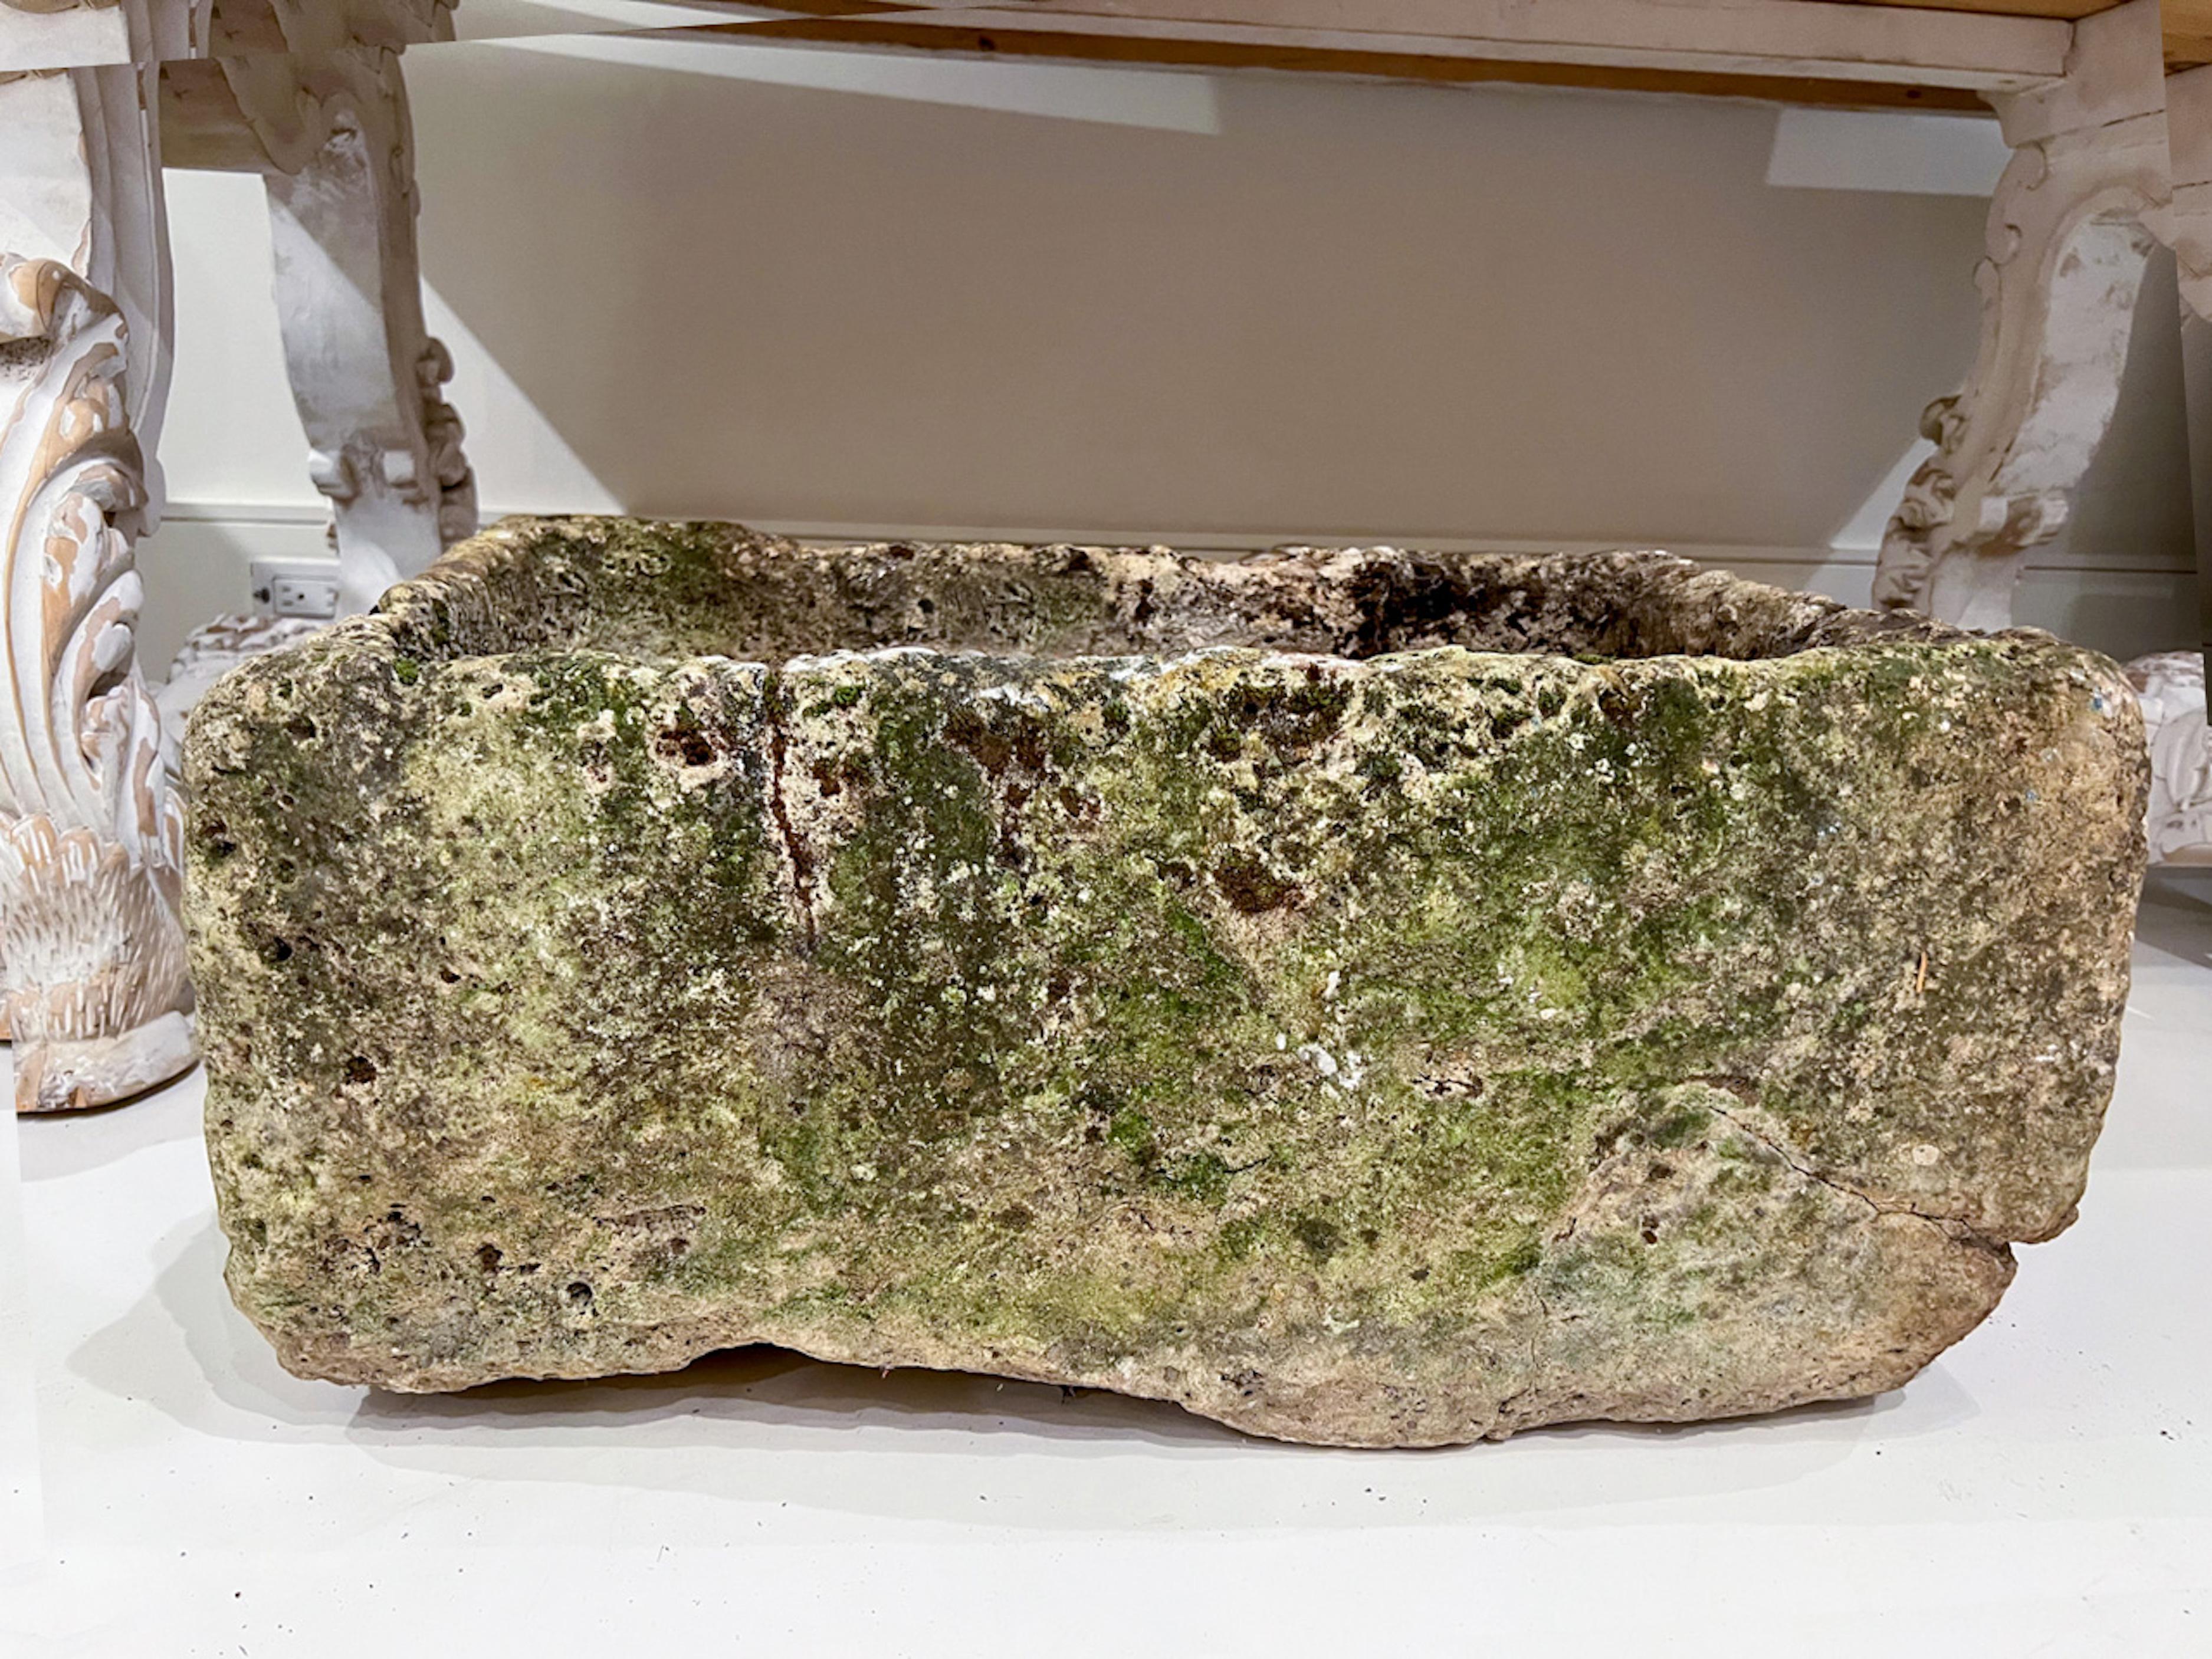 18th Century French sink or trough with gorgeous patina. Very heavy stone with no drain hole. This is a one of a kind piece that could never be duplicated or copied.